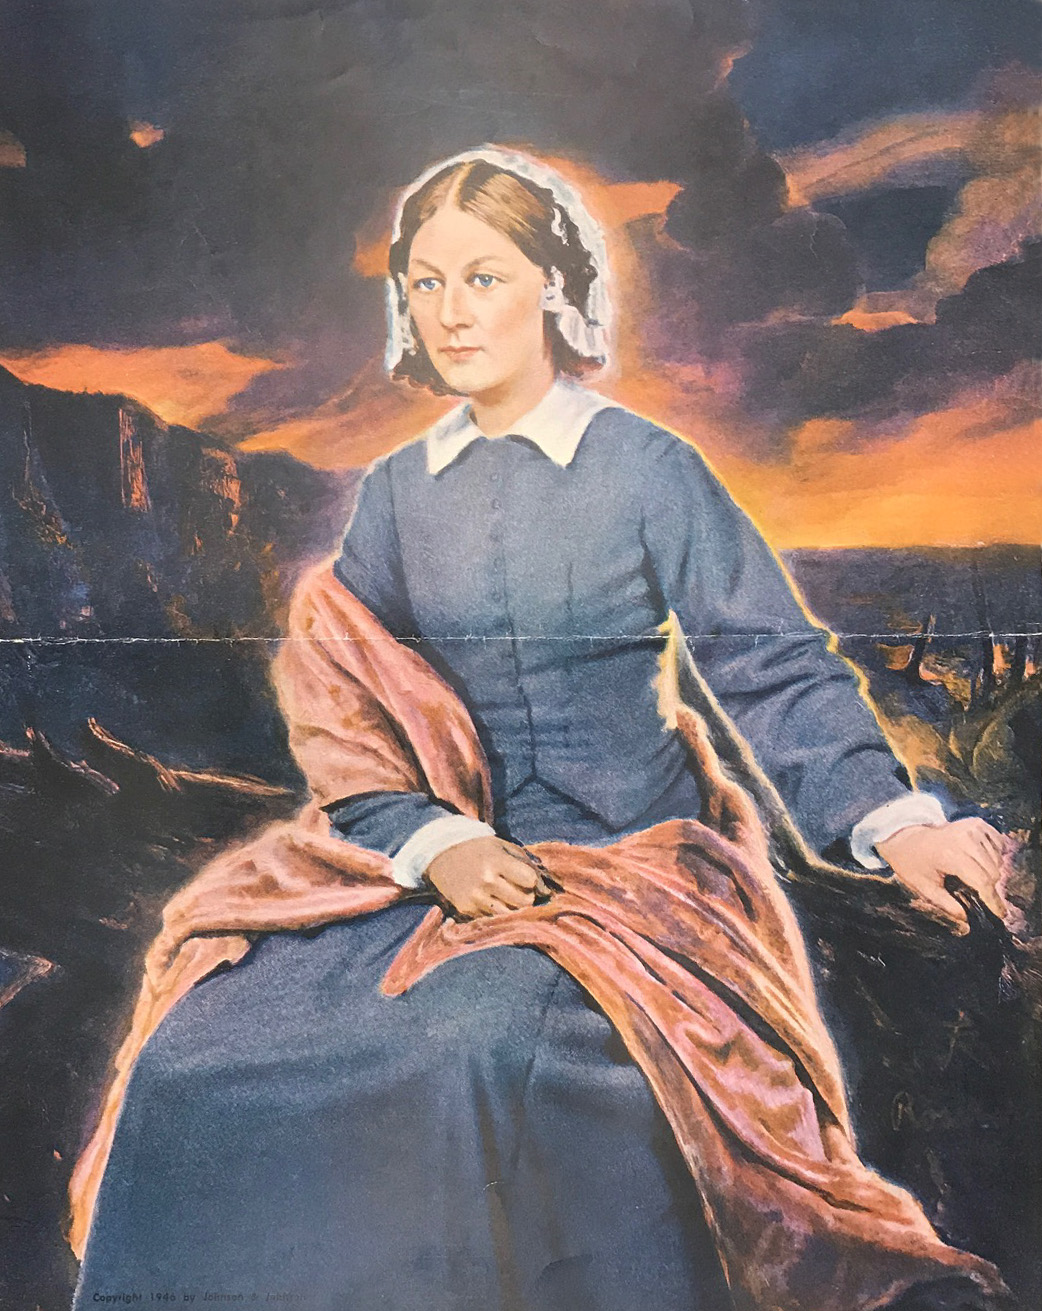 The painting of Florence Nightingale commissioned by Johnson & Johnson. Image courtesy: Johnson & Johnson Archives.